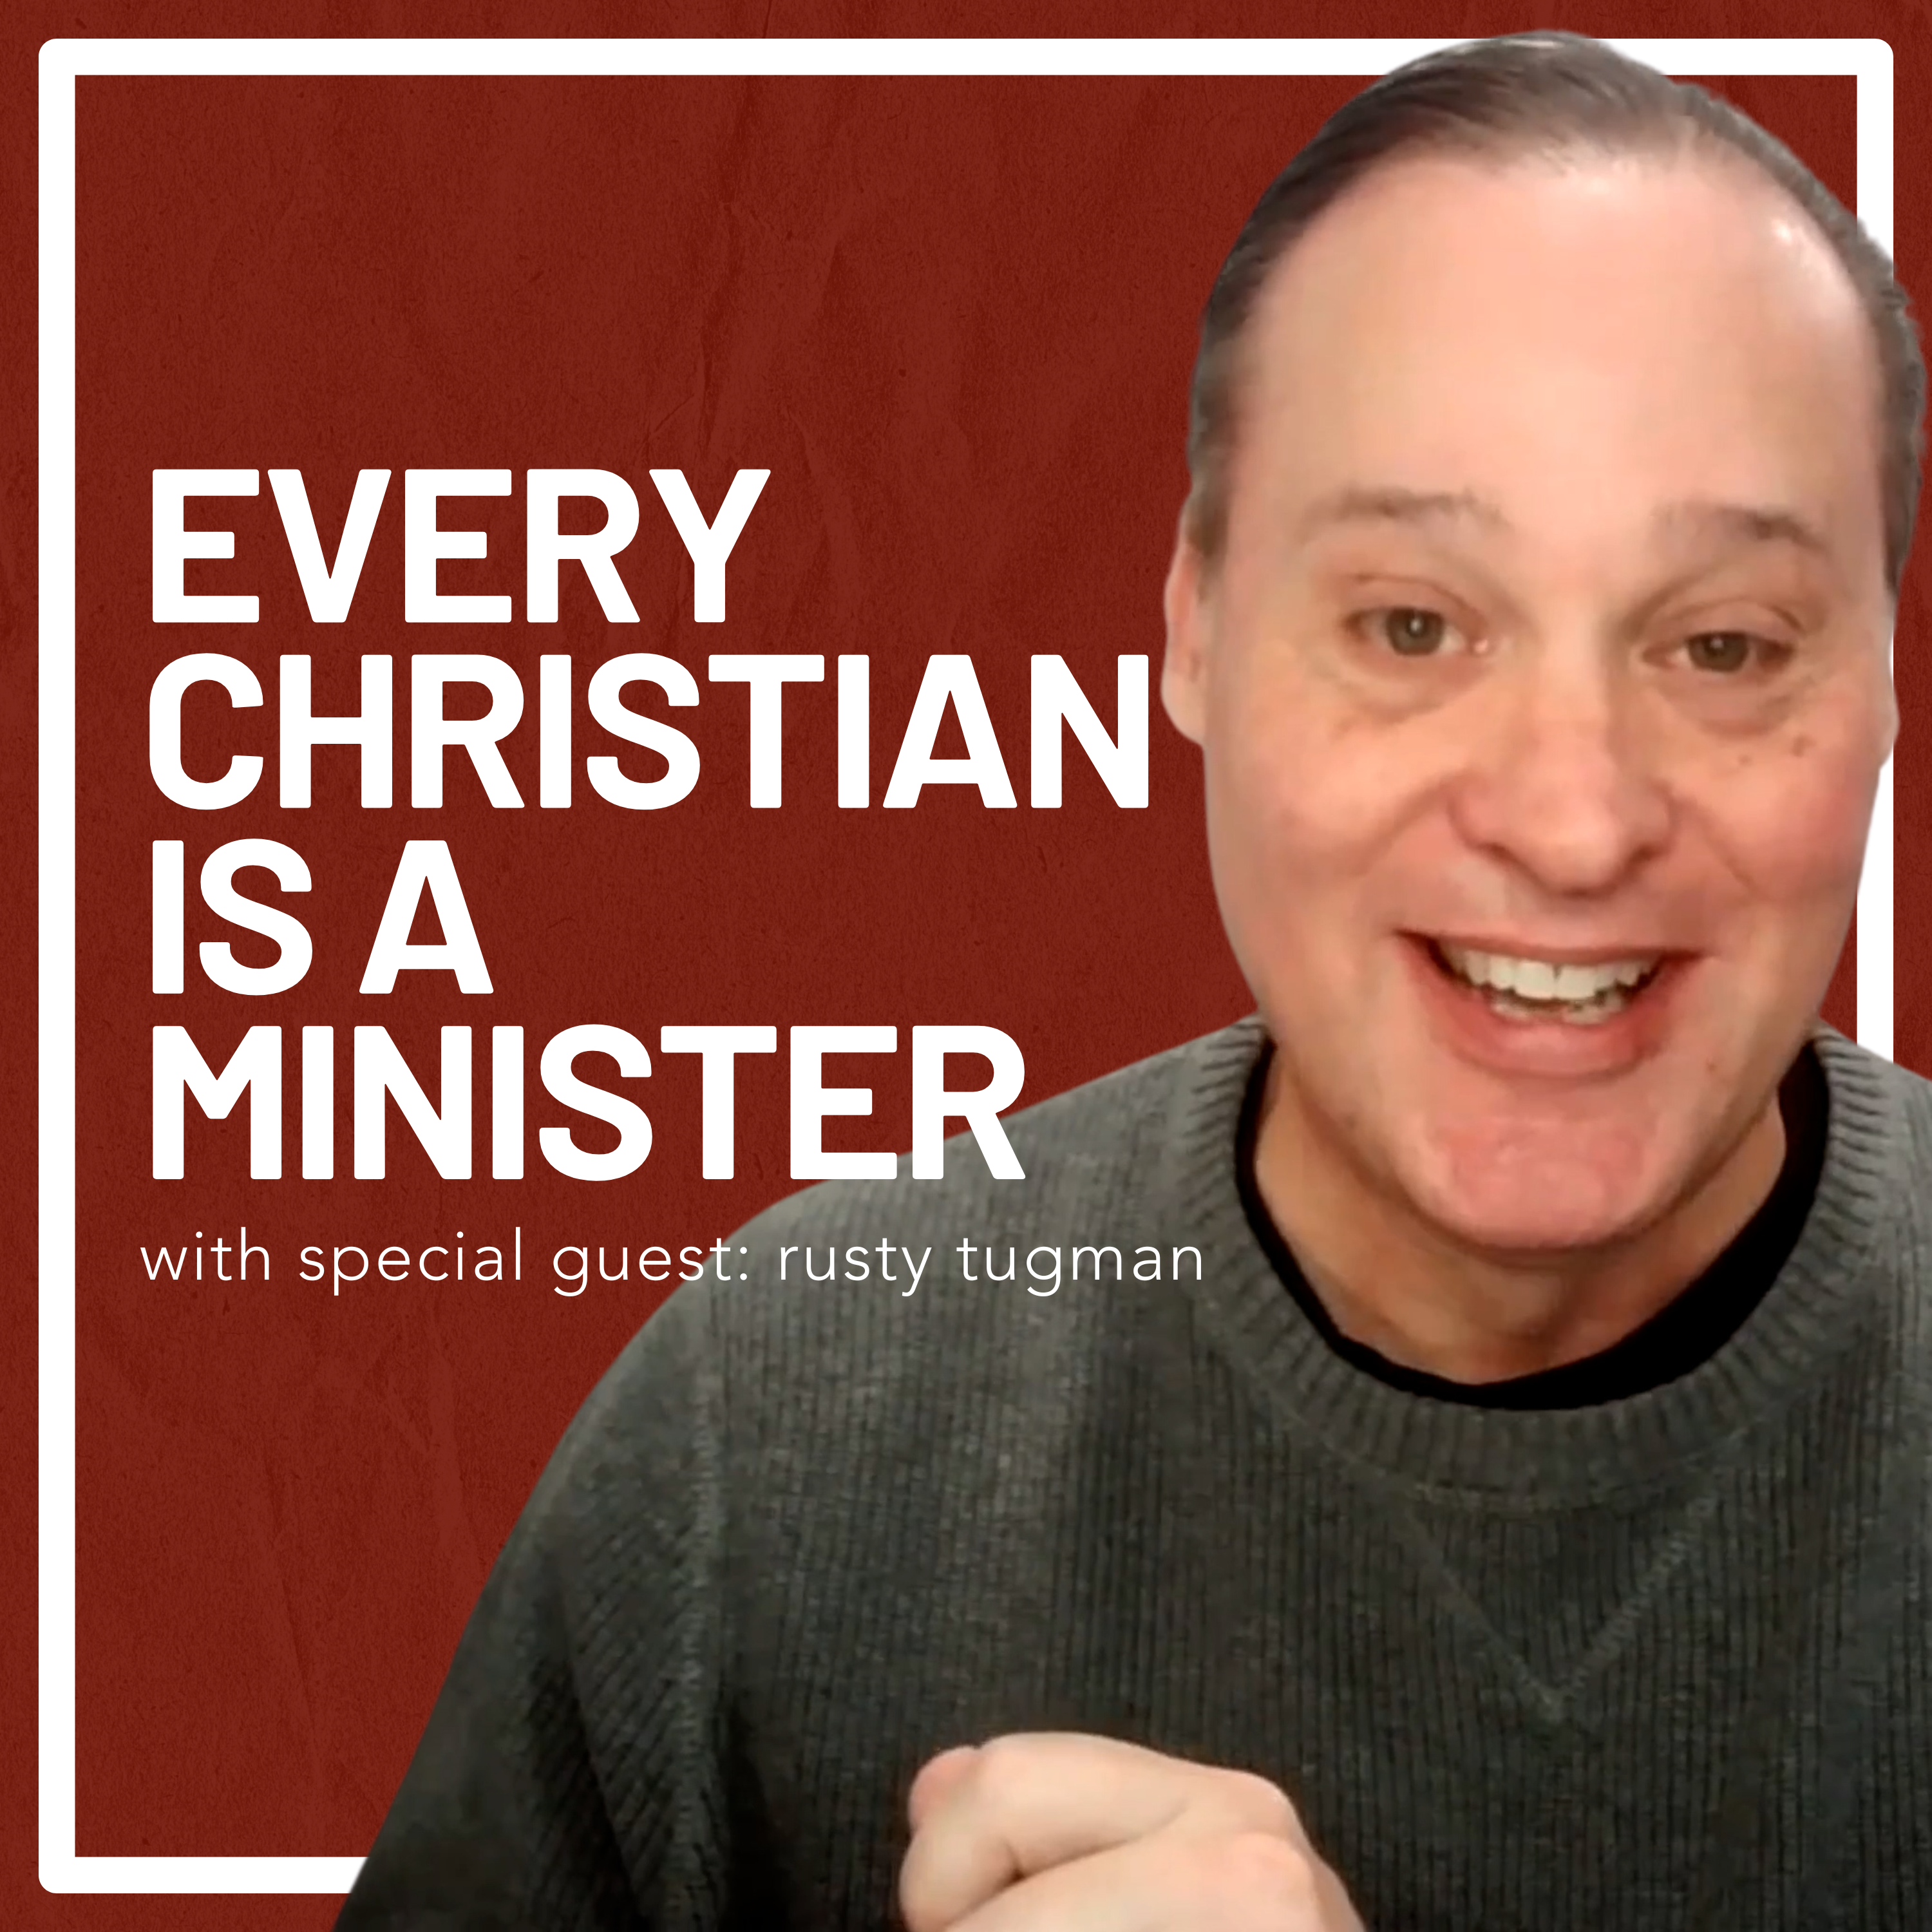 Every Christian is a Minister